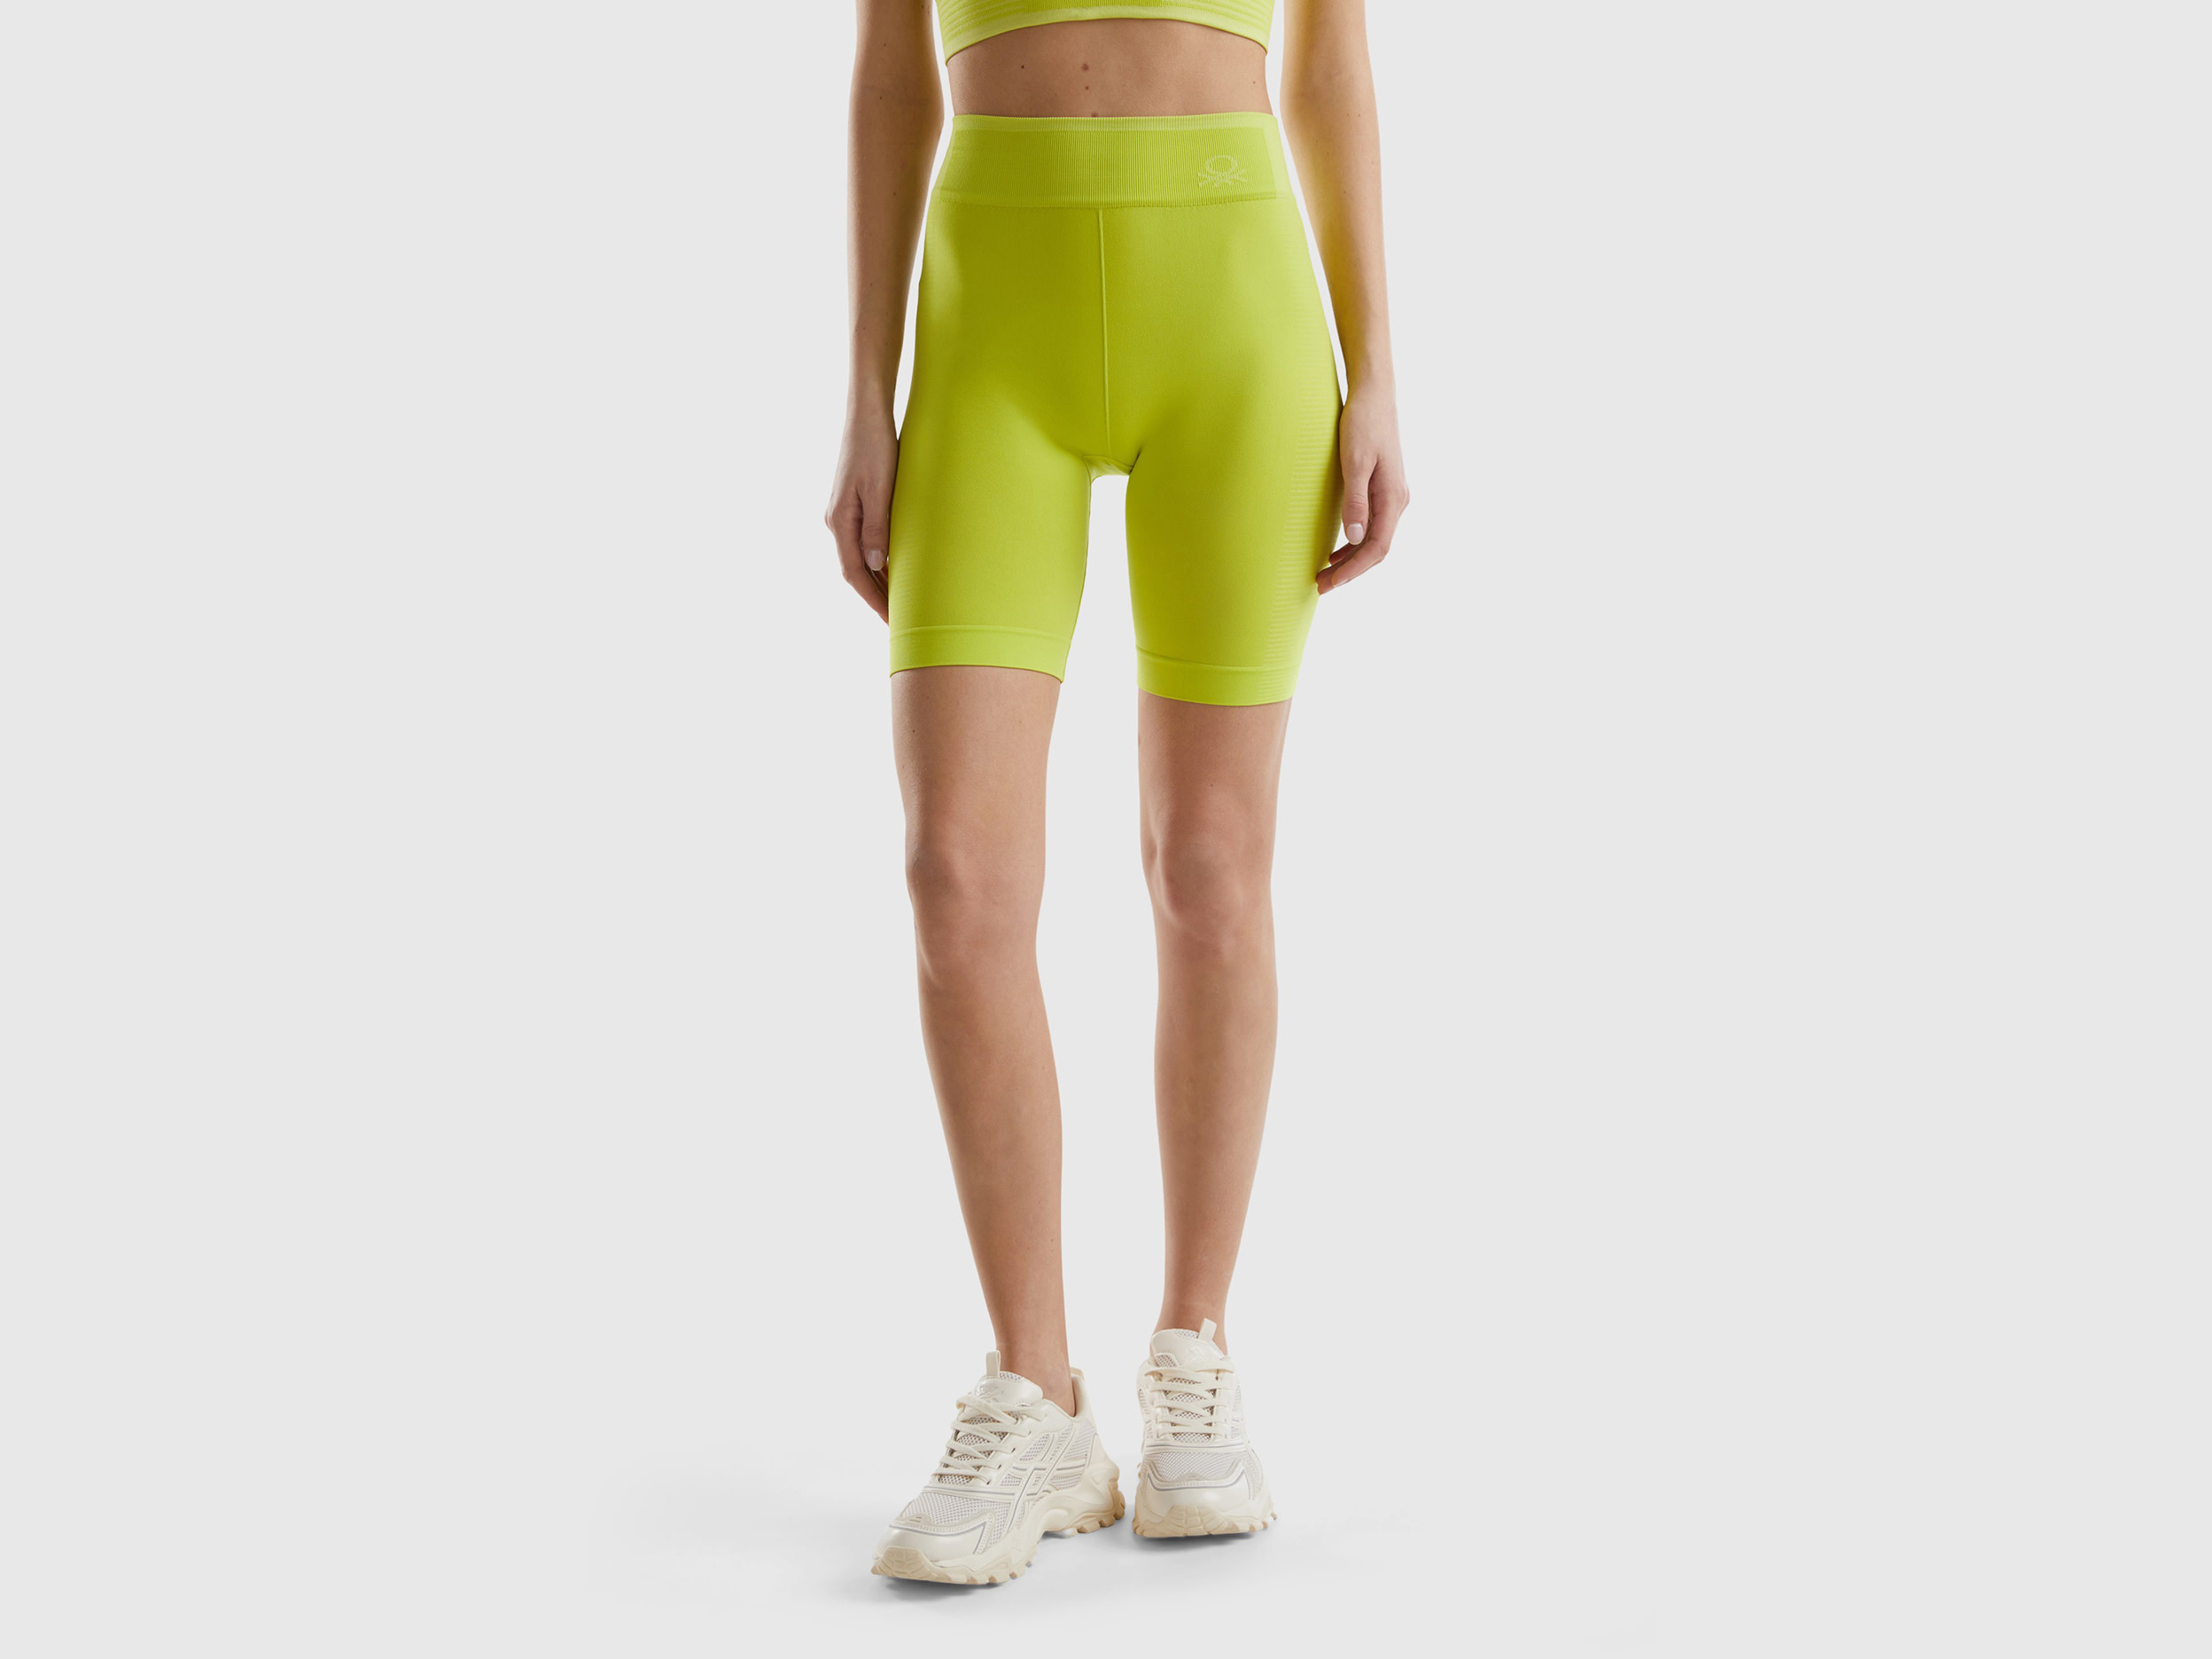 Image of Benetton, Seamless Sports Cycling Leggings, size S, Lime, Women